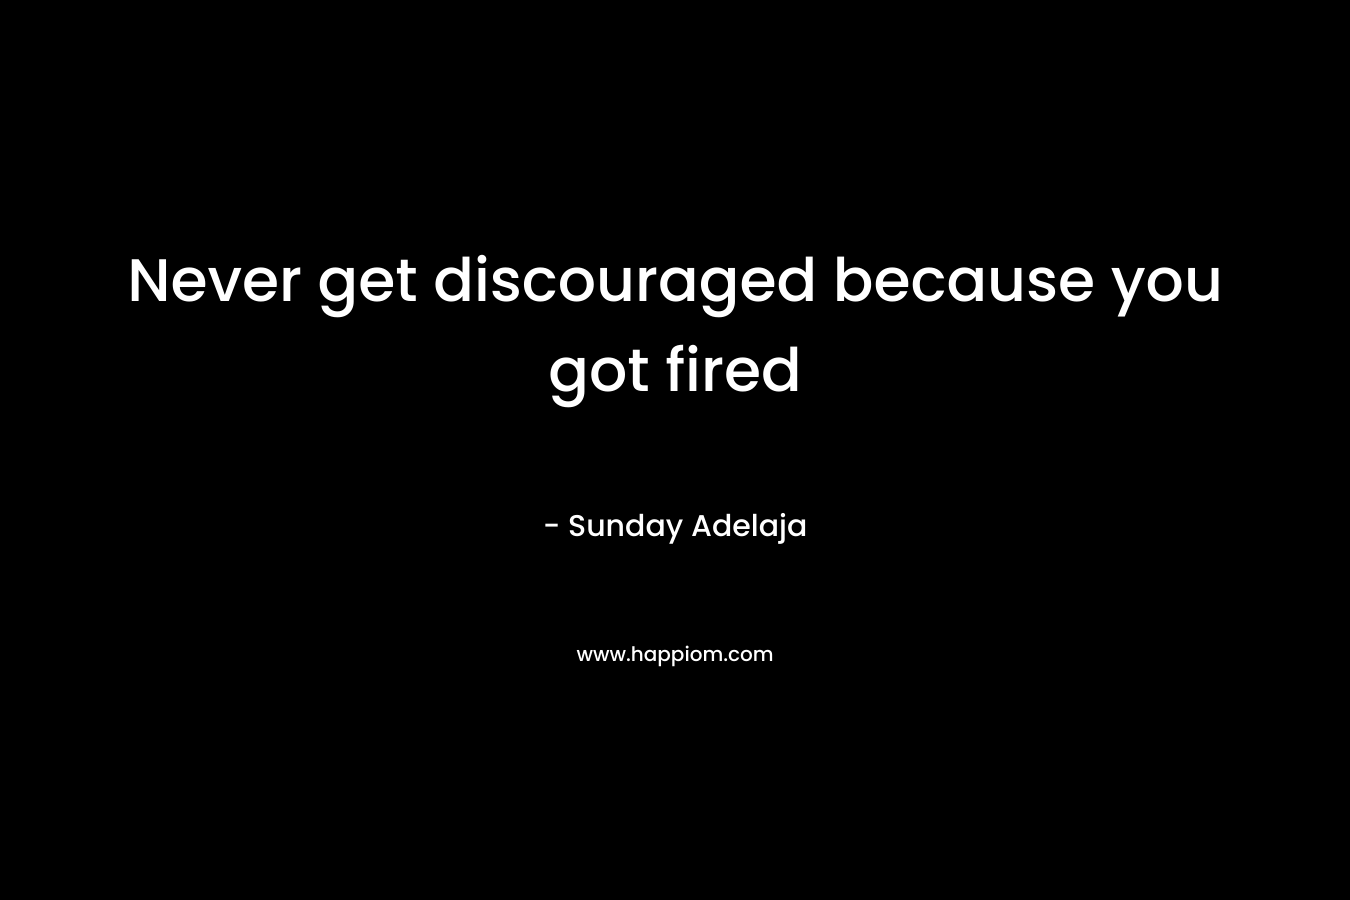 Never get discouraged because you got fired